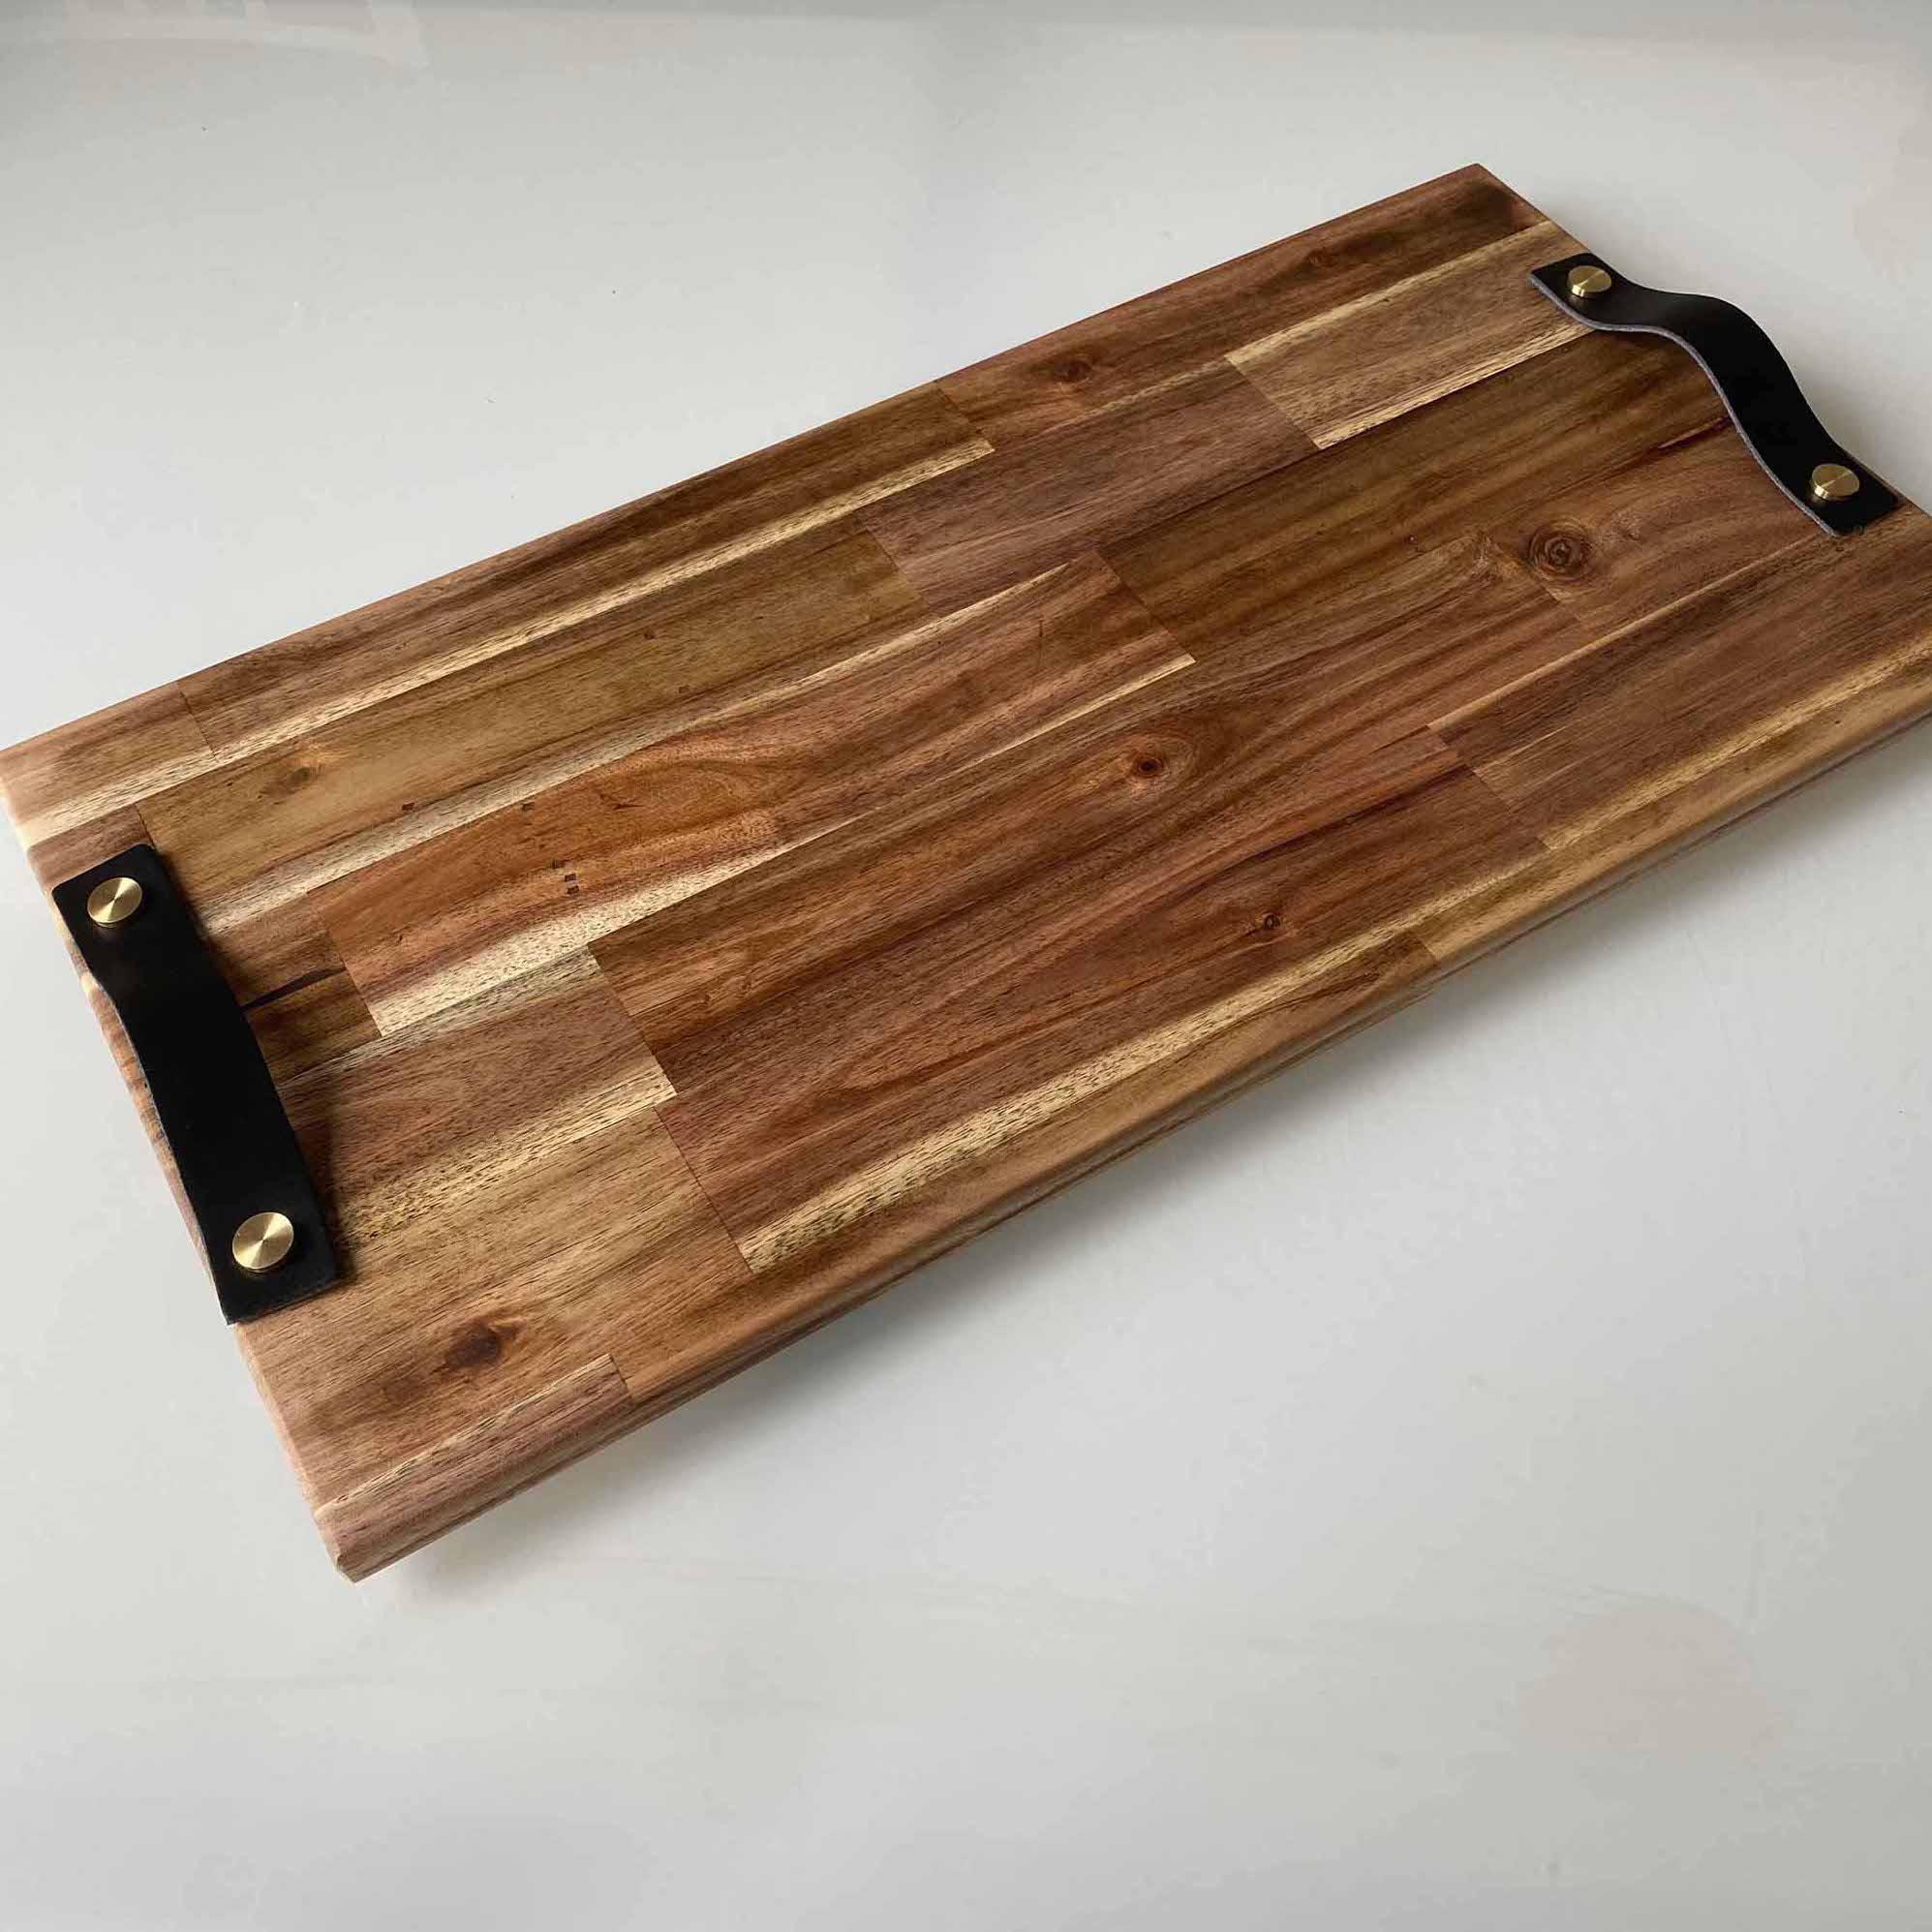 Hand made Charcuterie/Grazing Board / Cheese Platter with leather handles 600mm x 300mm